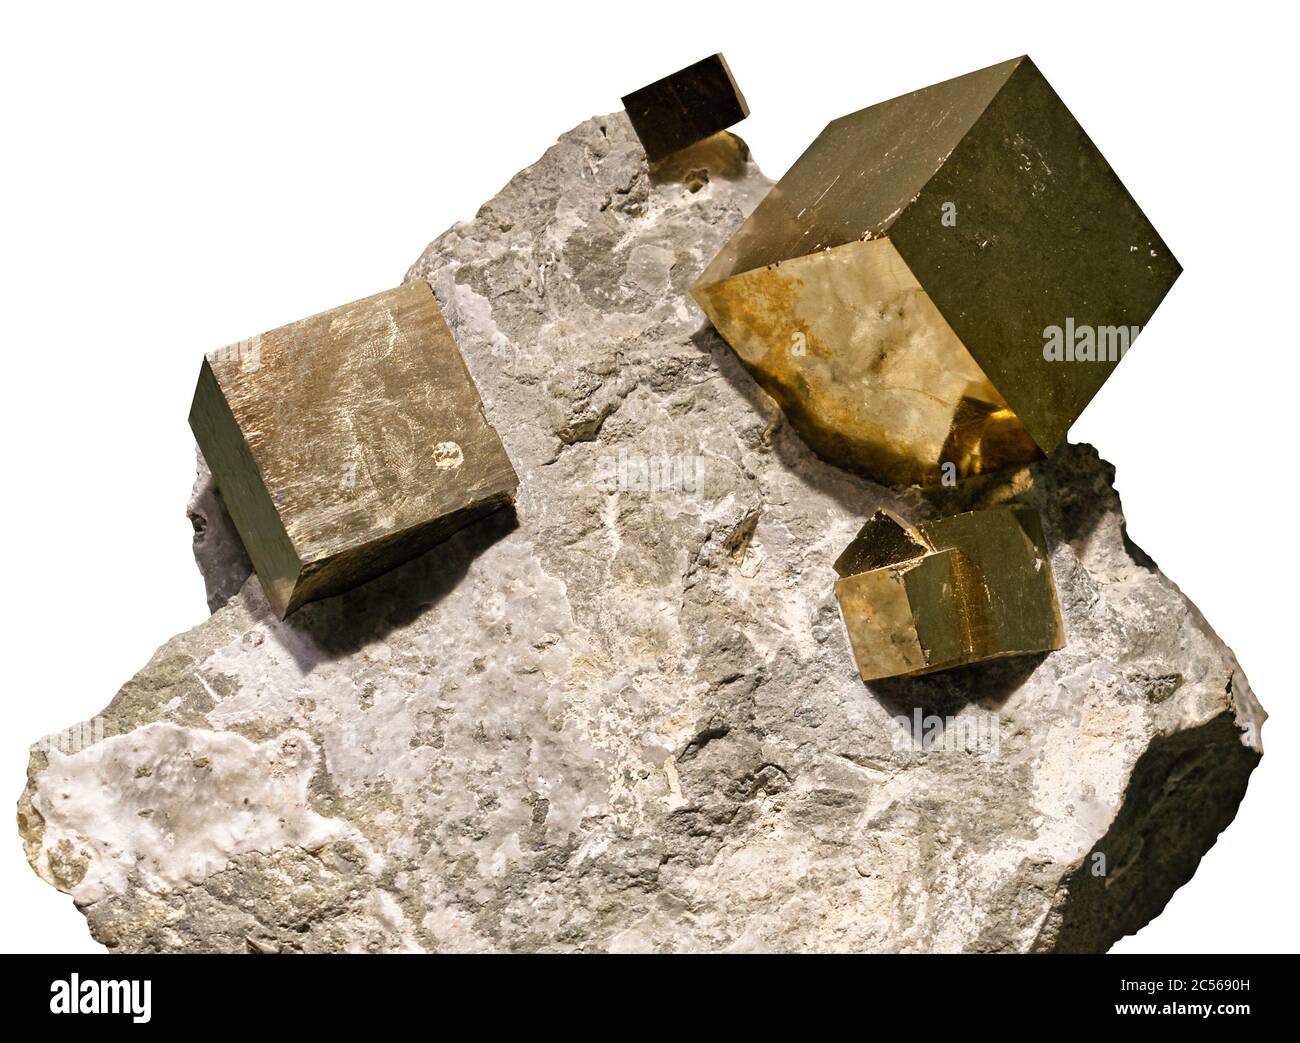 Pyrite cubic crystals embedded in a matrix on white background Stock Photo